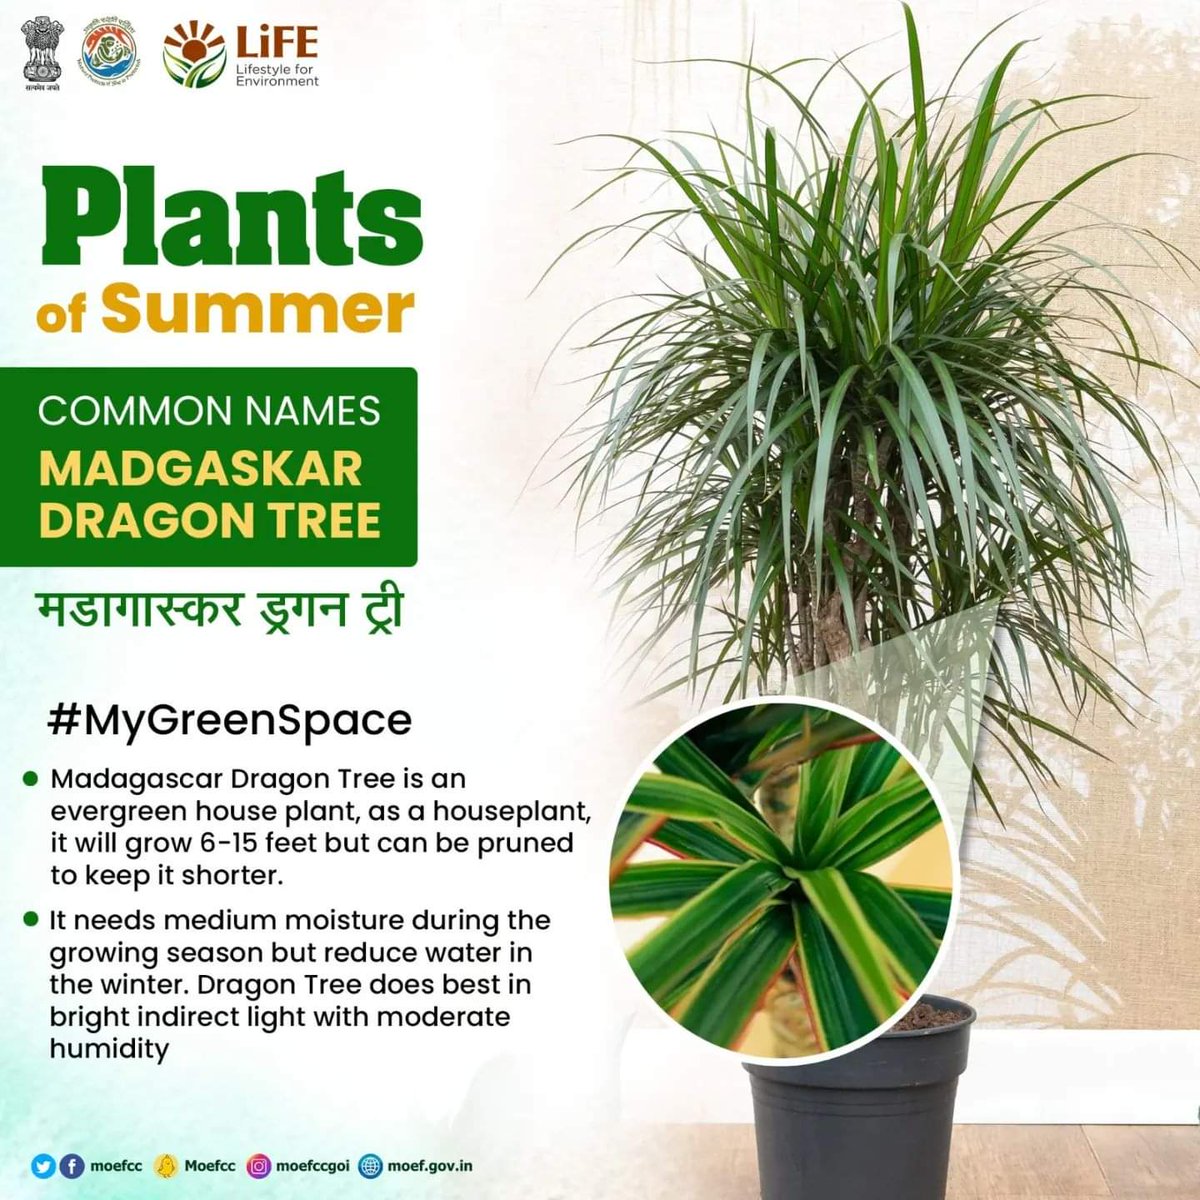 Make your summer refreshing by planting #PlantsofSummer in your indoor and outdoor spaces! #MyGreenSpace #ProPlanetPeople #MissionLiFE